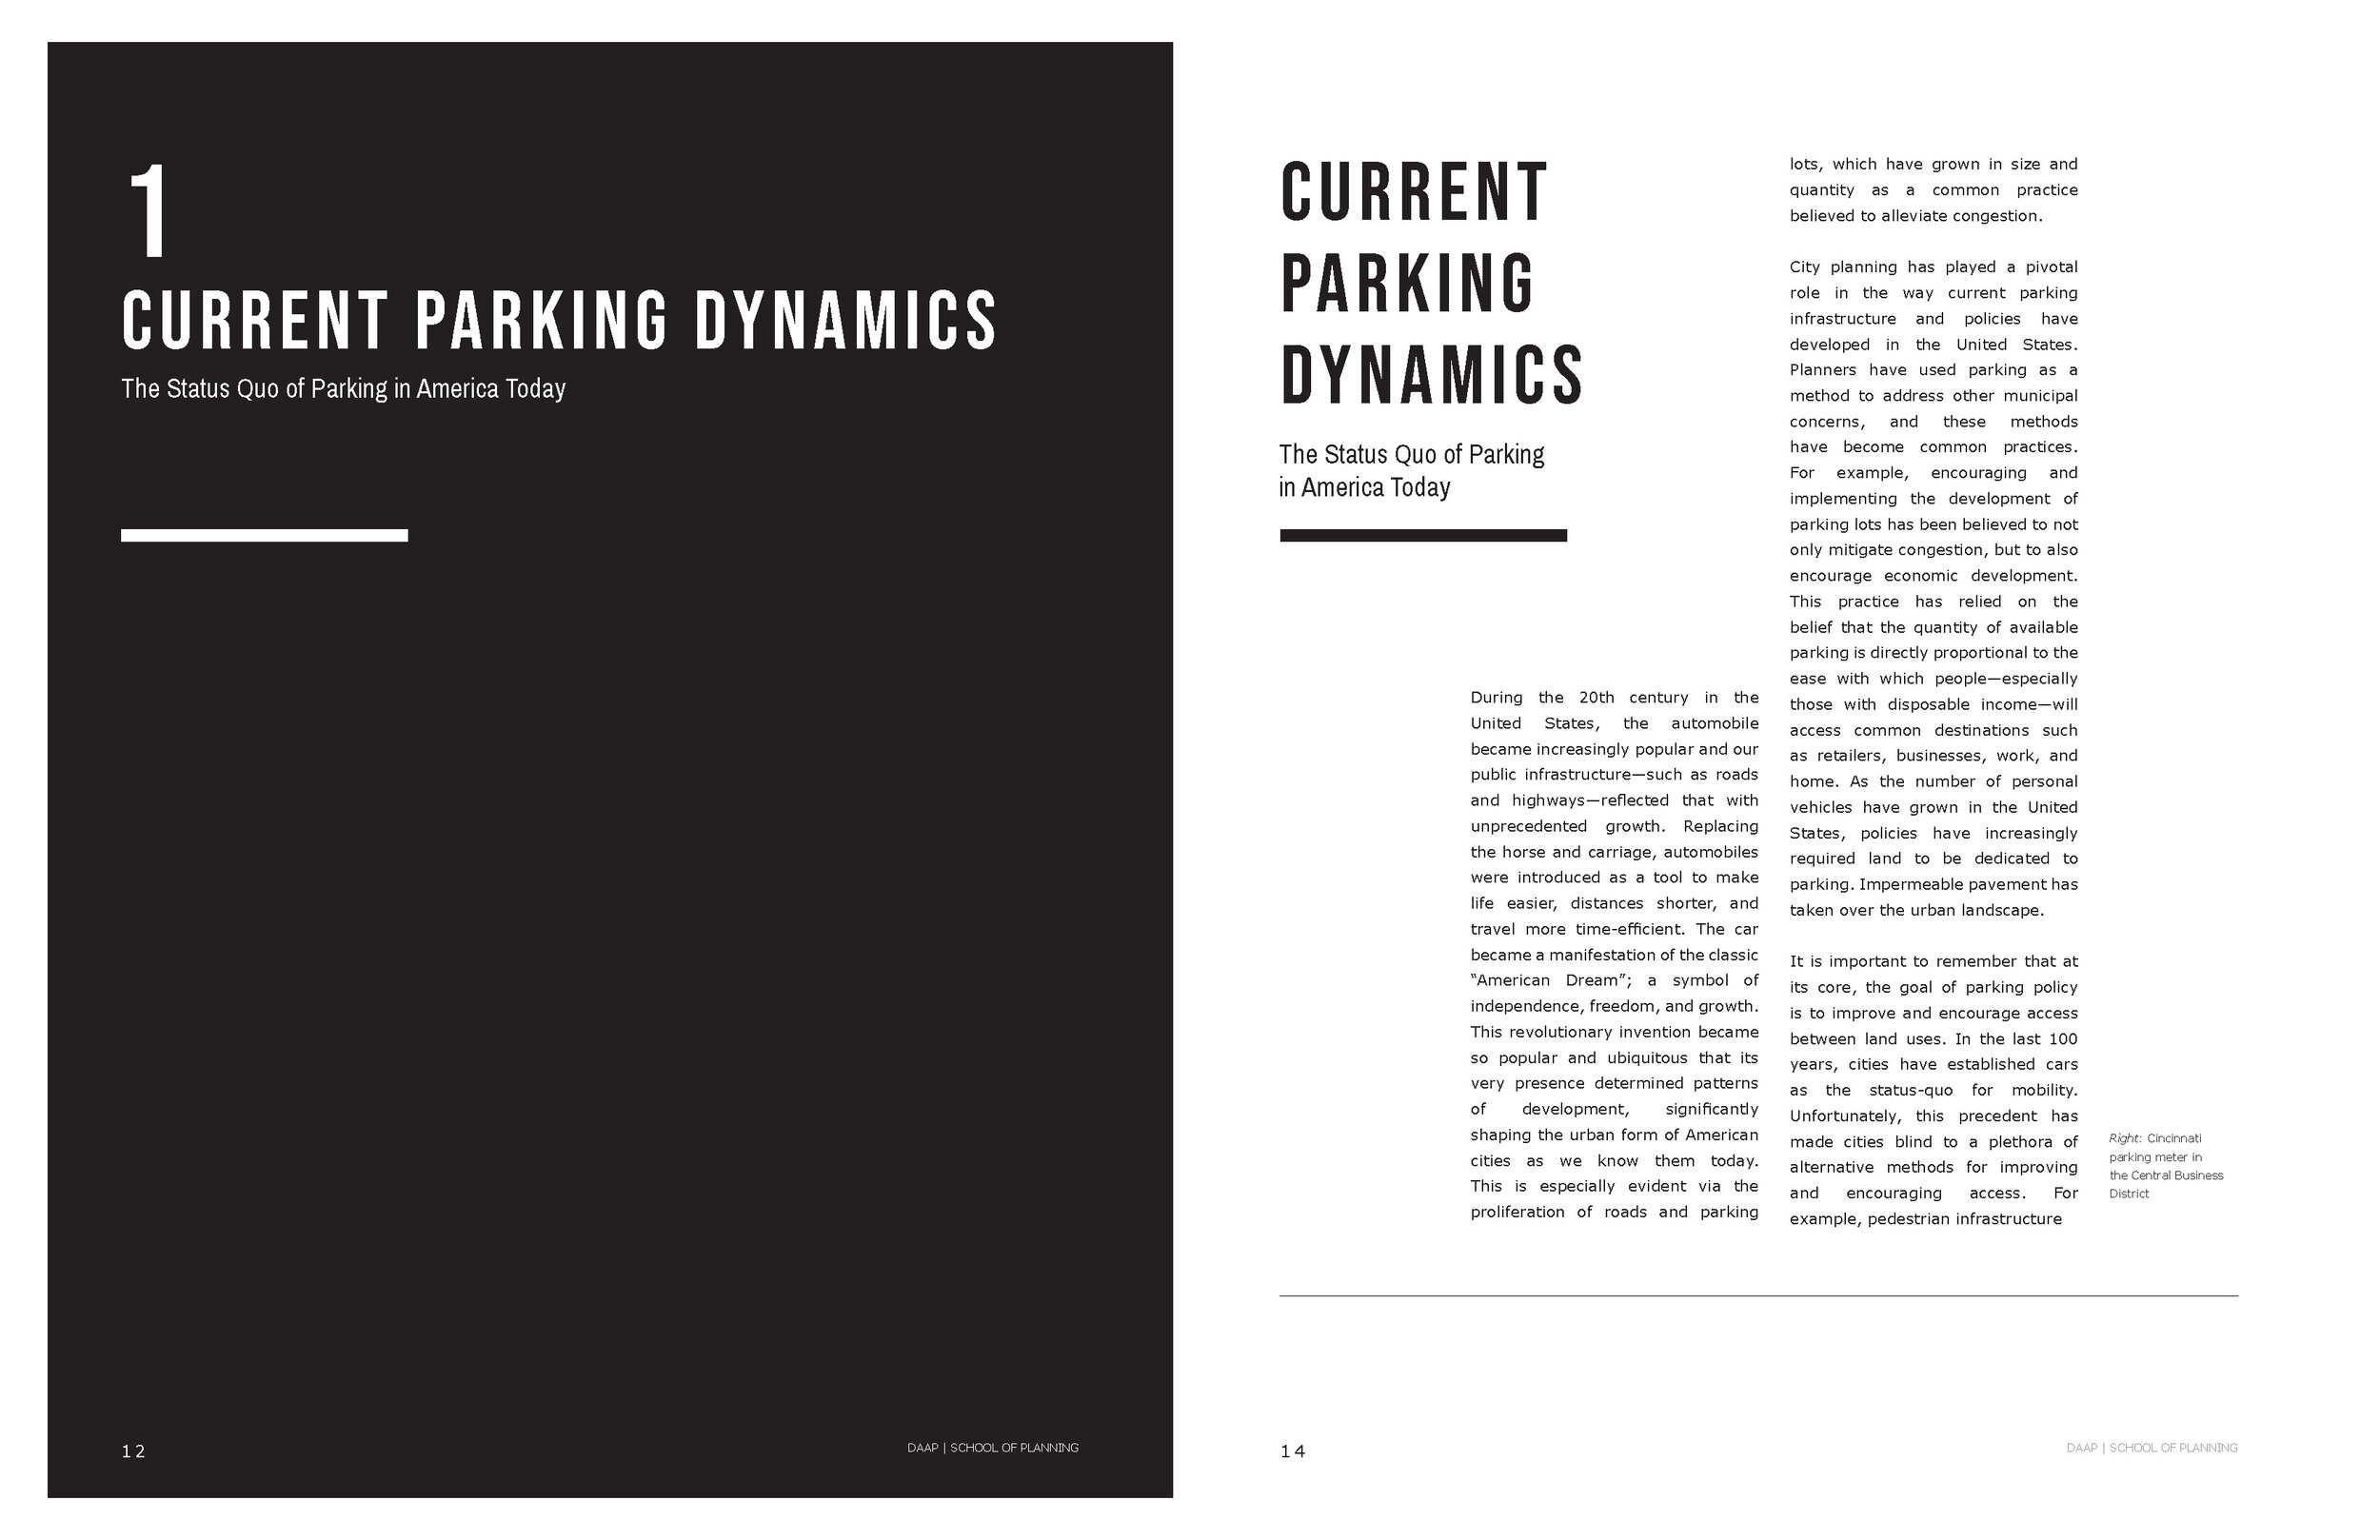 Fall 2019 - Future of Parking research report_ABRIDGED_02_Page_04.jpg